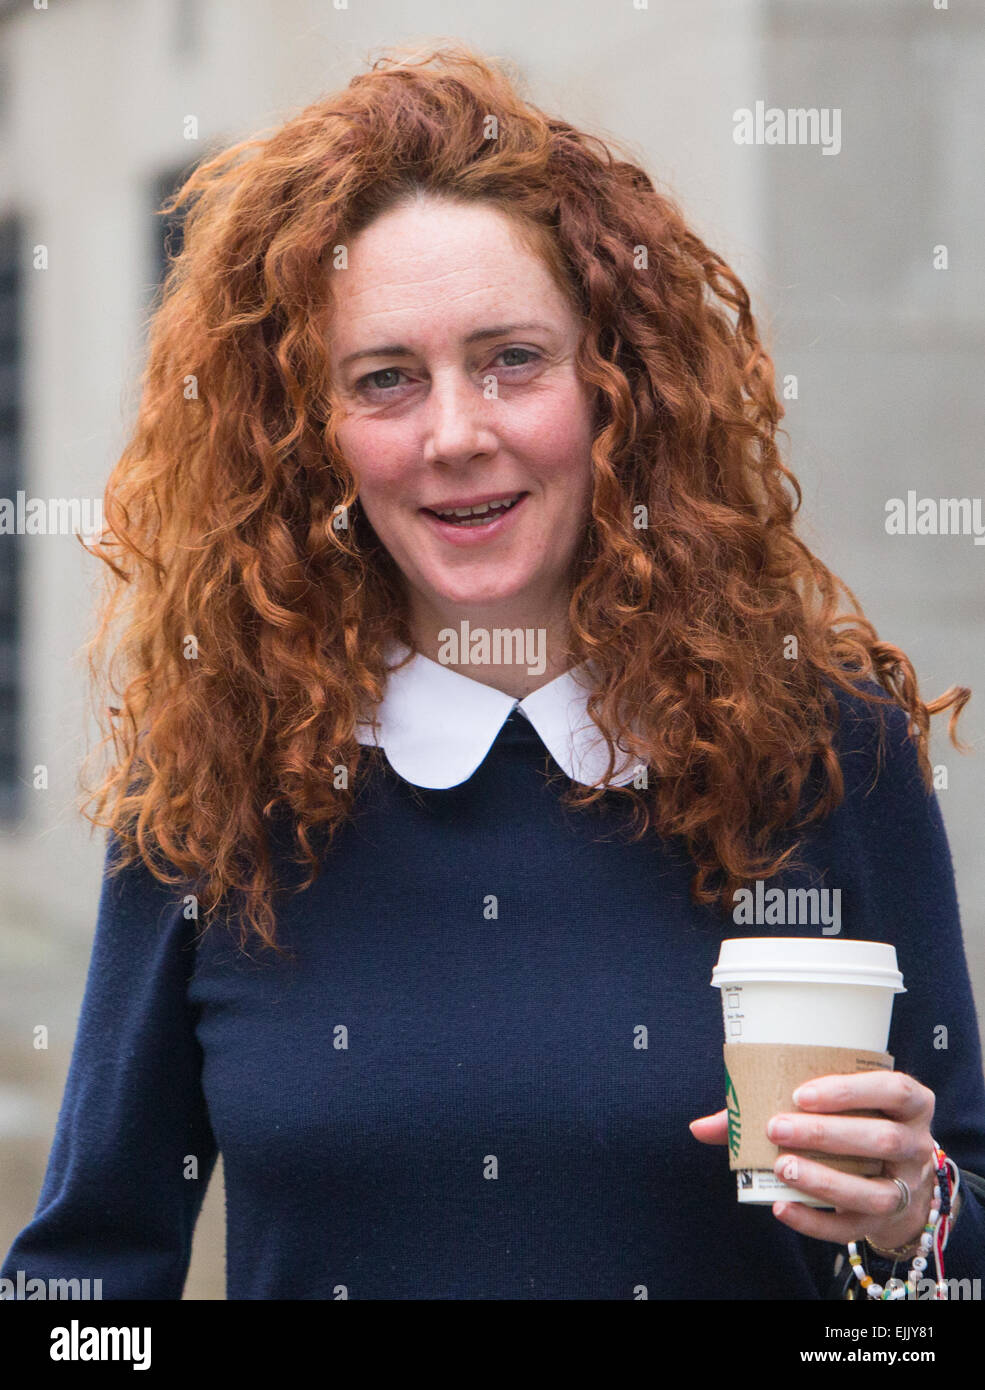 Rebekah Brooks,Former Editor of the News of the World,arrives at the Old Bailey for the phone hacking trial Stock Photo